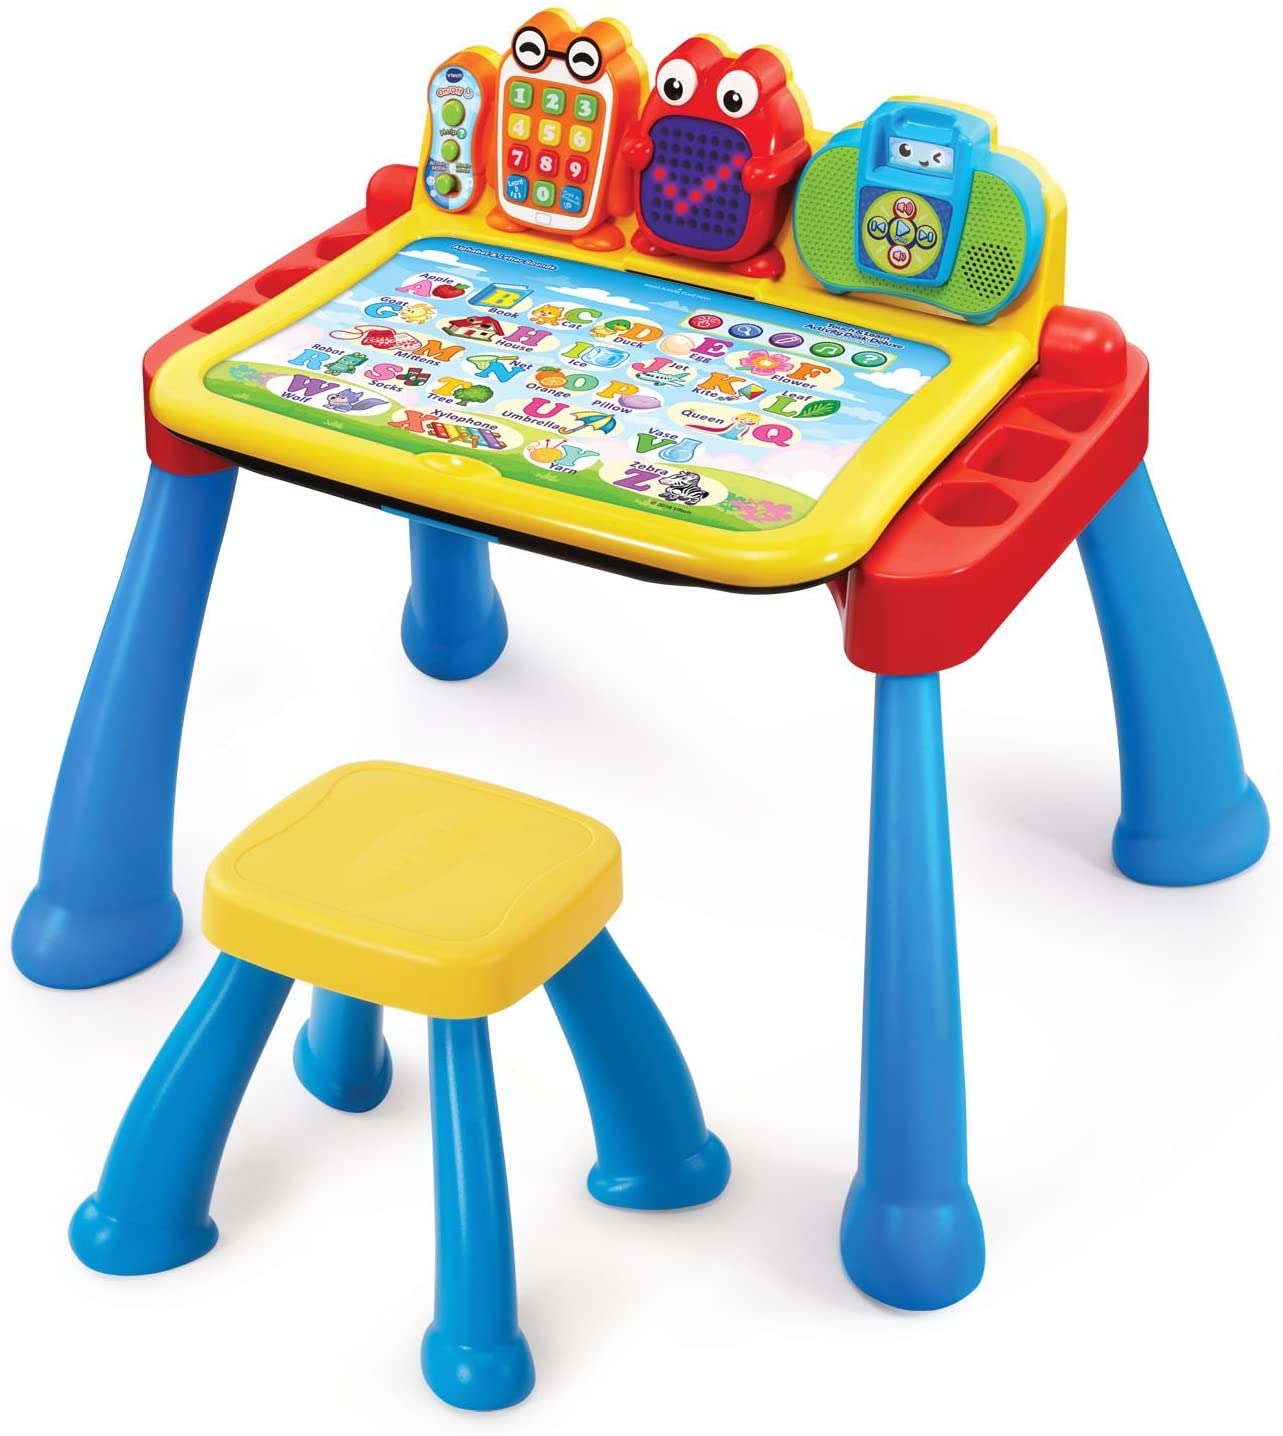 Vtech Touch And Learn Activity Desk Deluxe (80-194880)